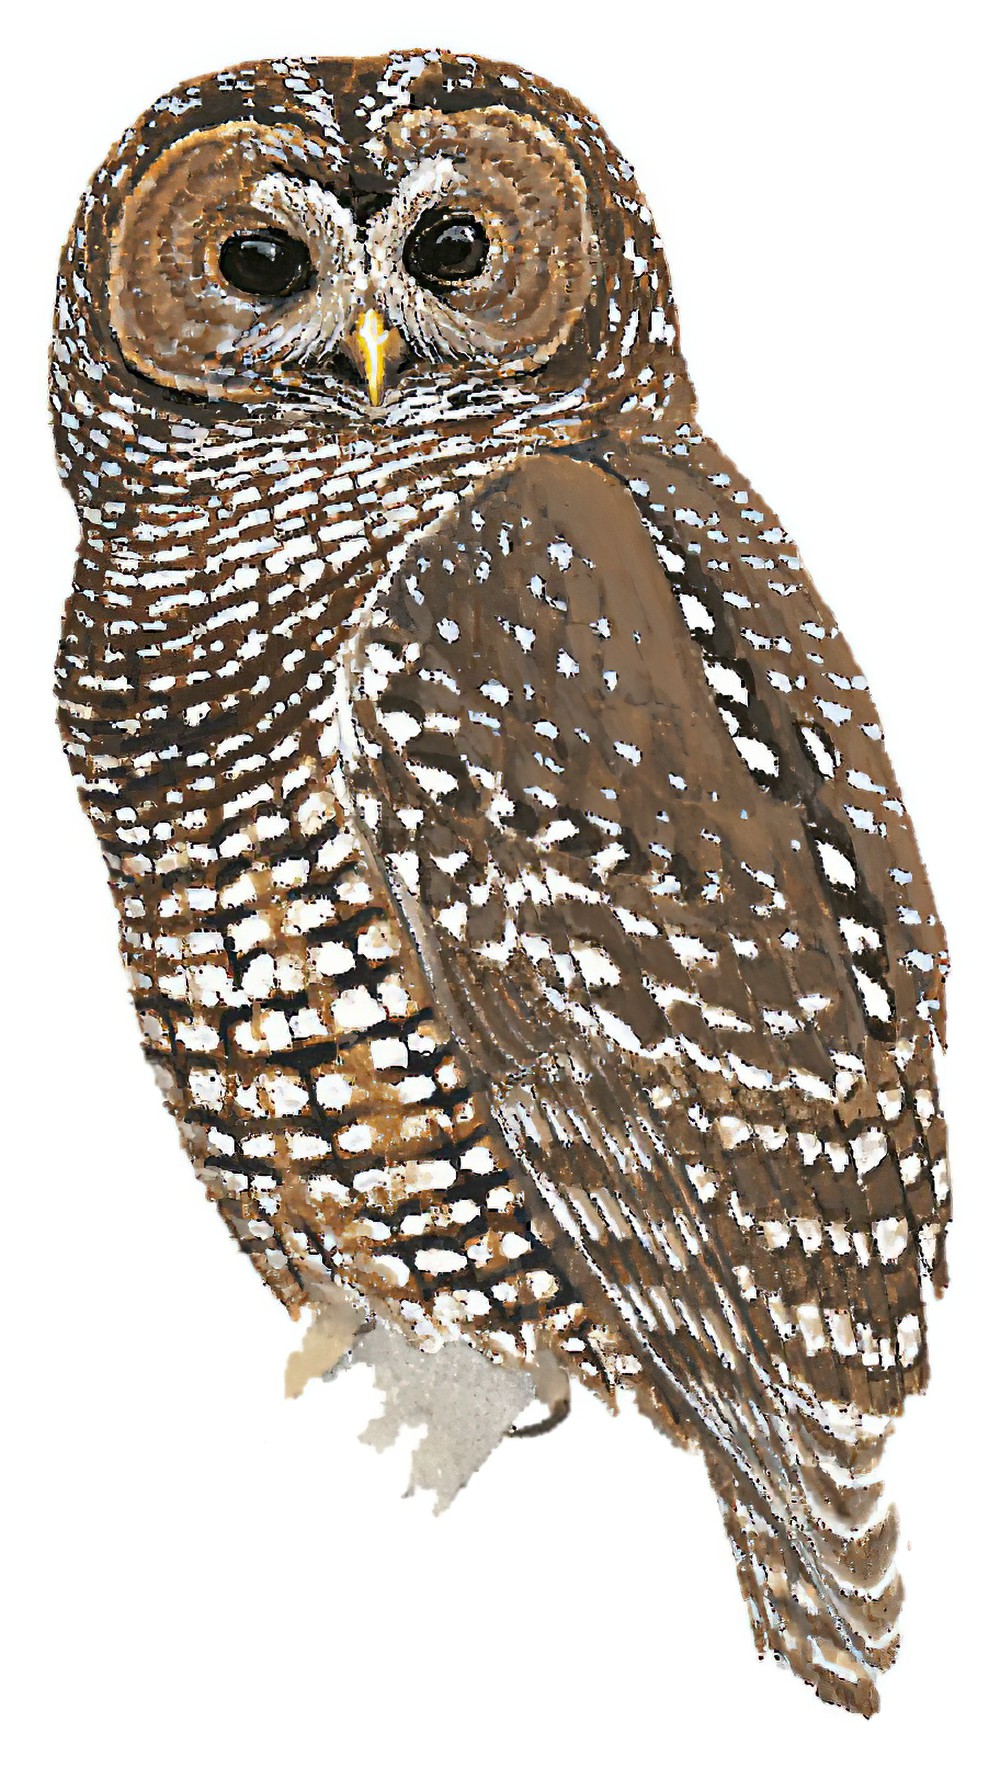 Spotted Owl / Strix occidentalis